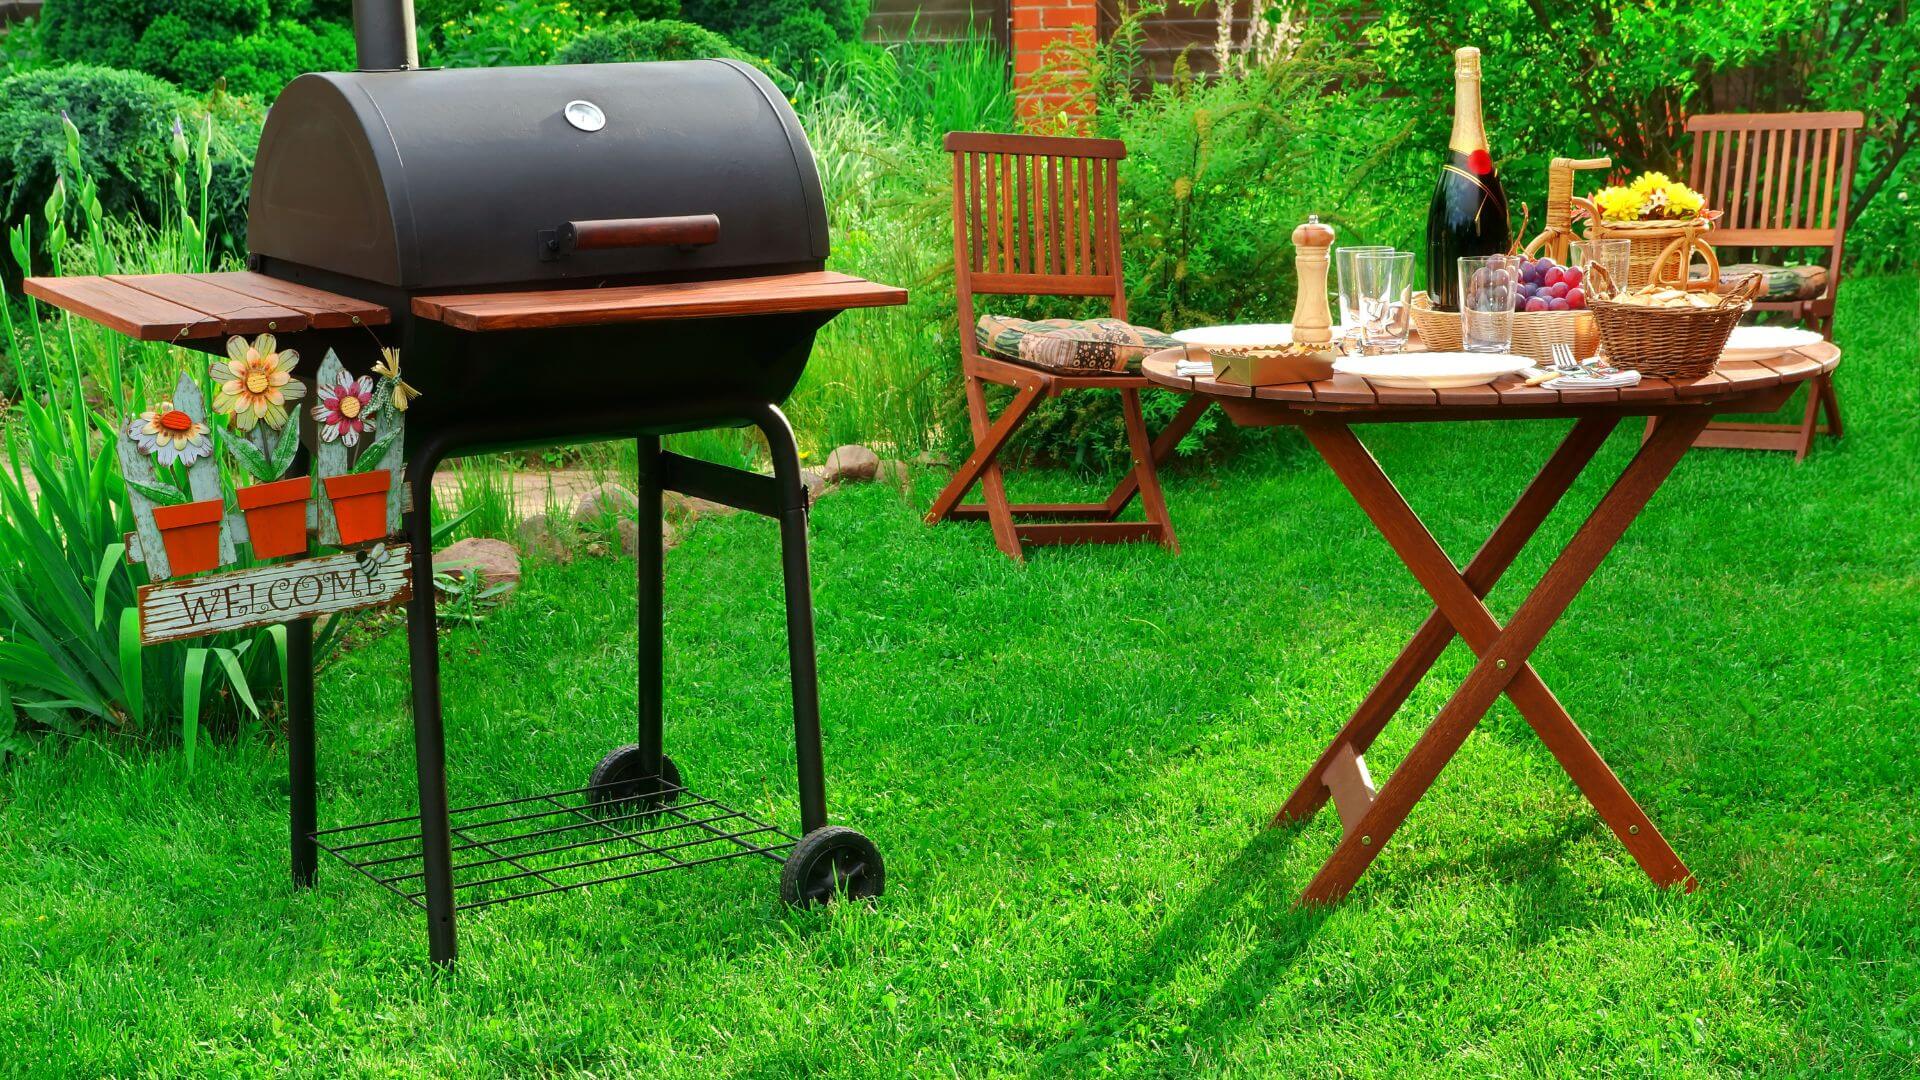 The Art of Charcoal Grilling How These BBQs Deliver a One-of-a-Kind Experience